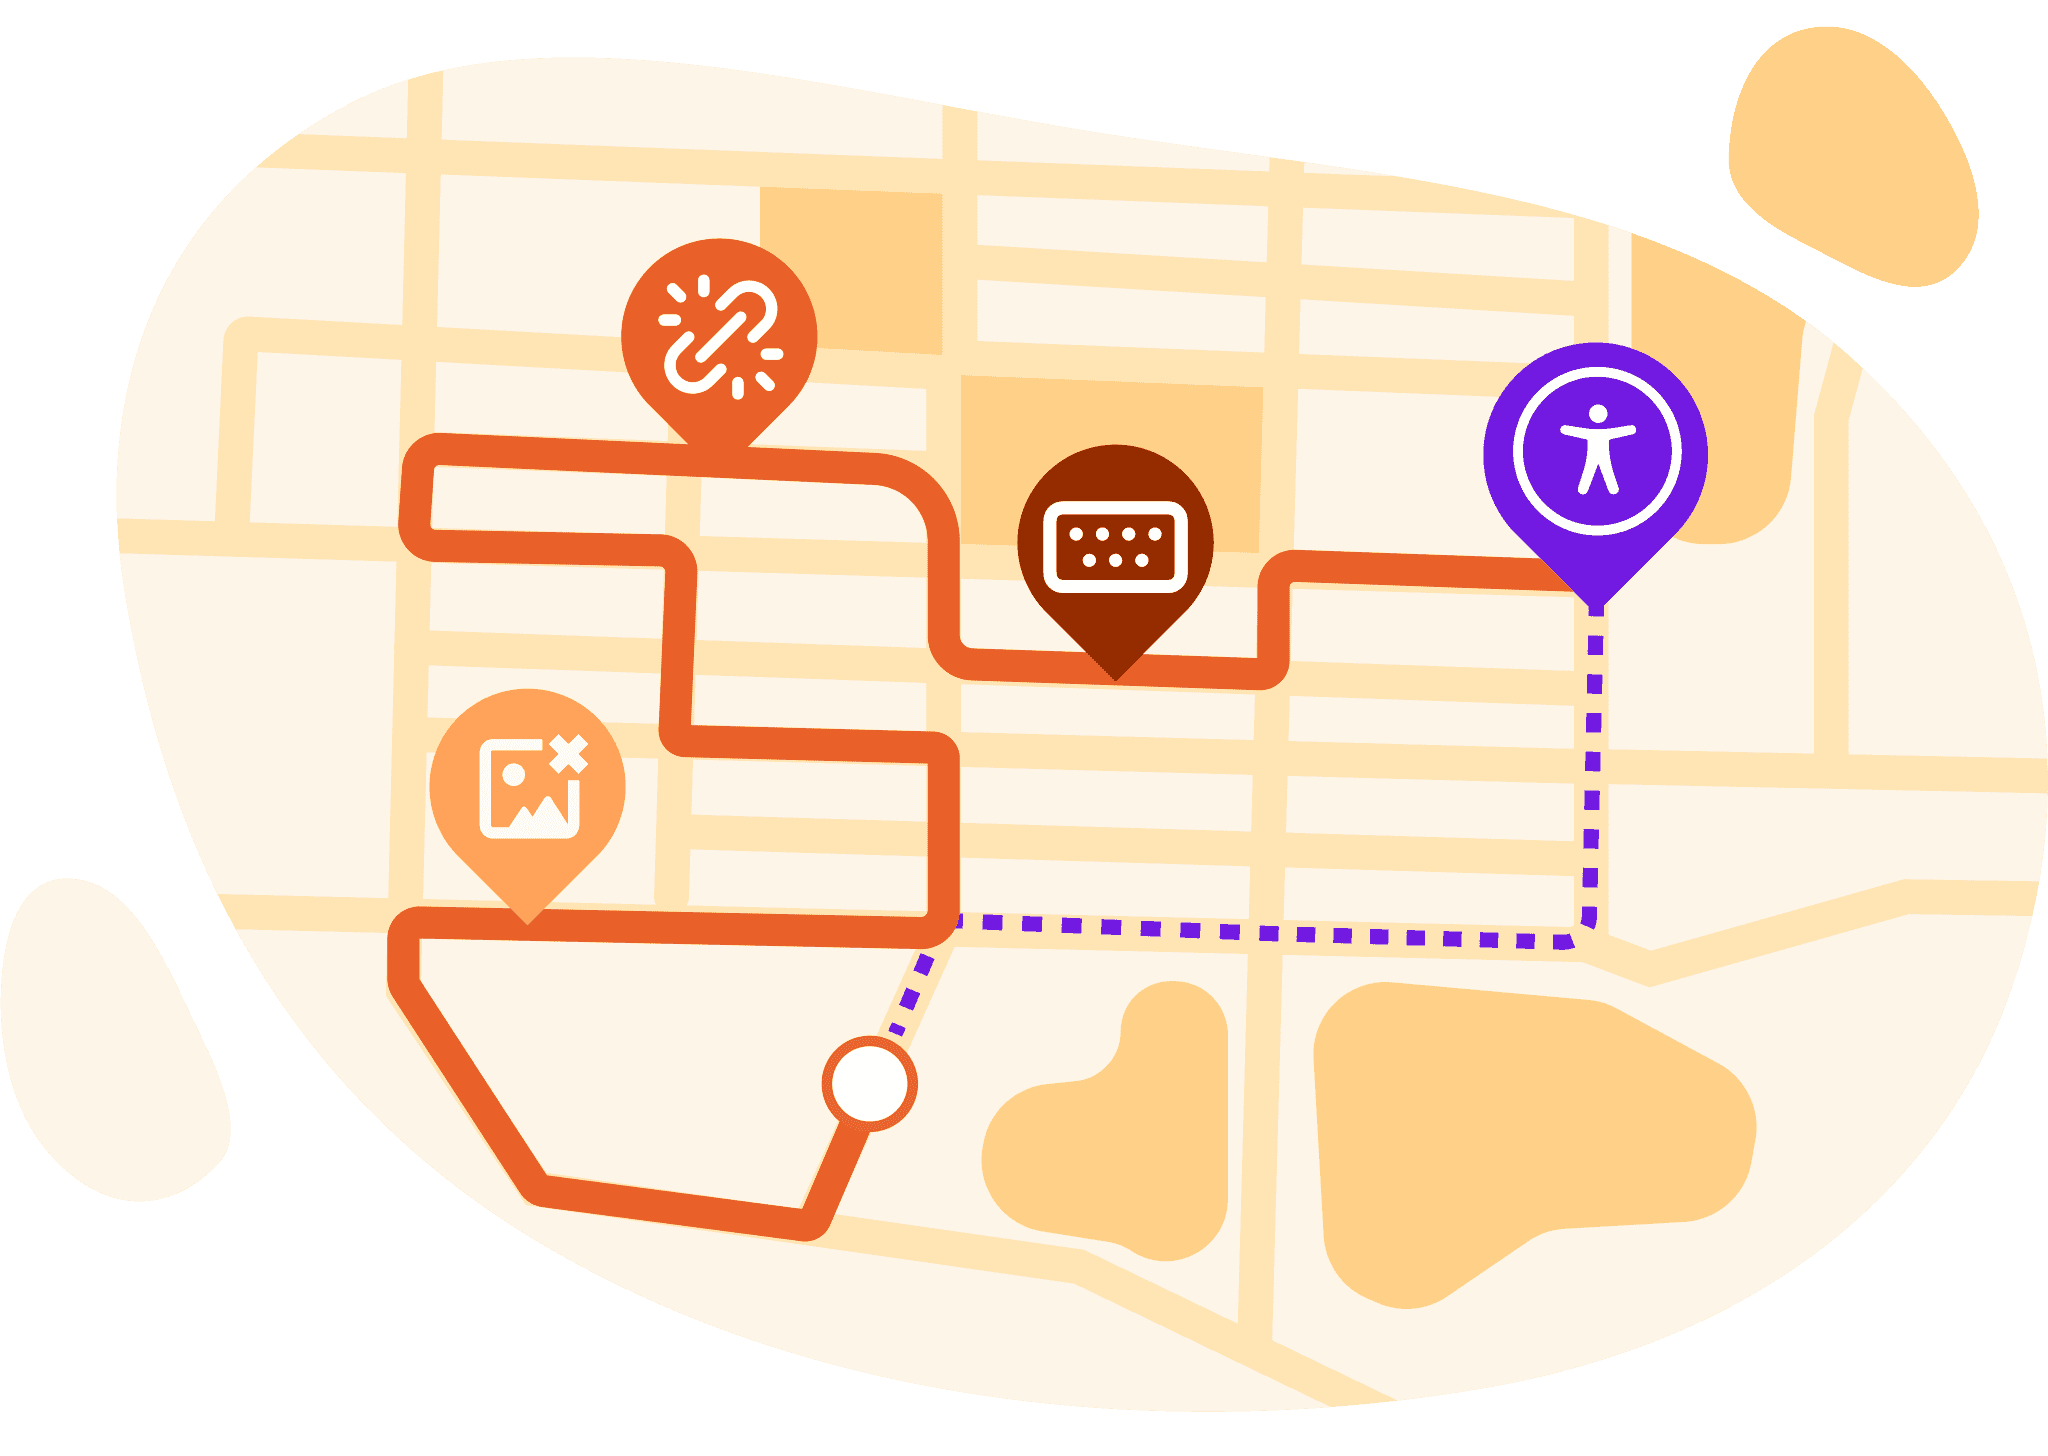 Stylized map illustrating inaccessible experiences are similar to directions that reroutes rather than giving you the direct route.